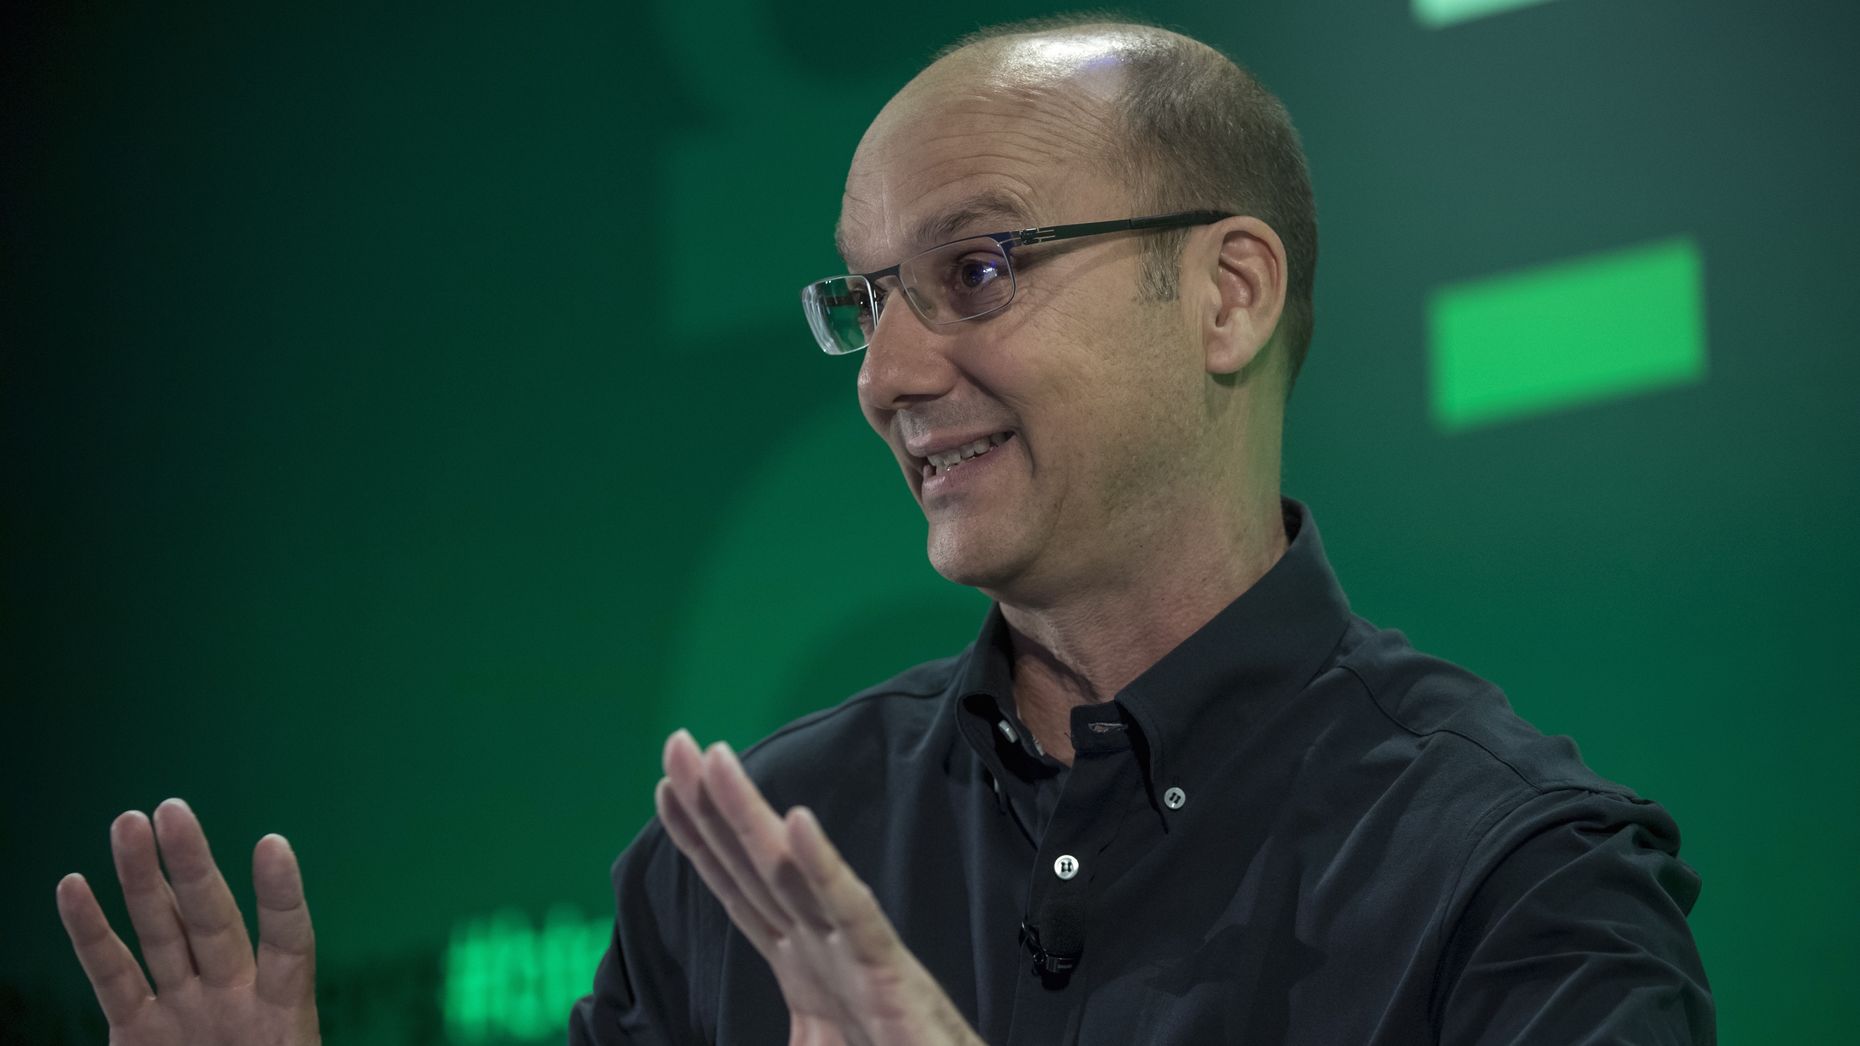 Andy Rubin, venture partner at Redpoint Ventures, speaks during the Bloomberg Technology Conference in San Francisco, California, U.S., on Tuesday, June 14, 2016. The Bloomberg Technology Conference, which brings together companies and chief executive officers from around the world that strive to be inventive and innovative, the institutions that spawn and support inventors, and the disruptive inventors themselves runs through June 14. Photographer: David Paul Morris/Bloomberg